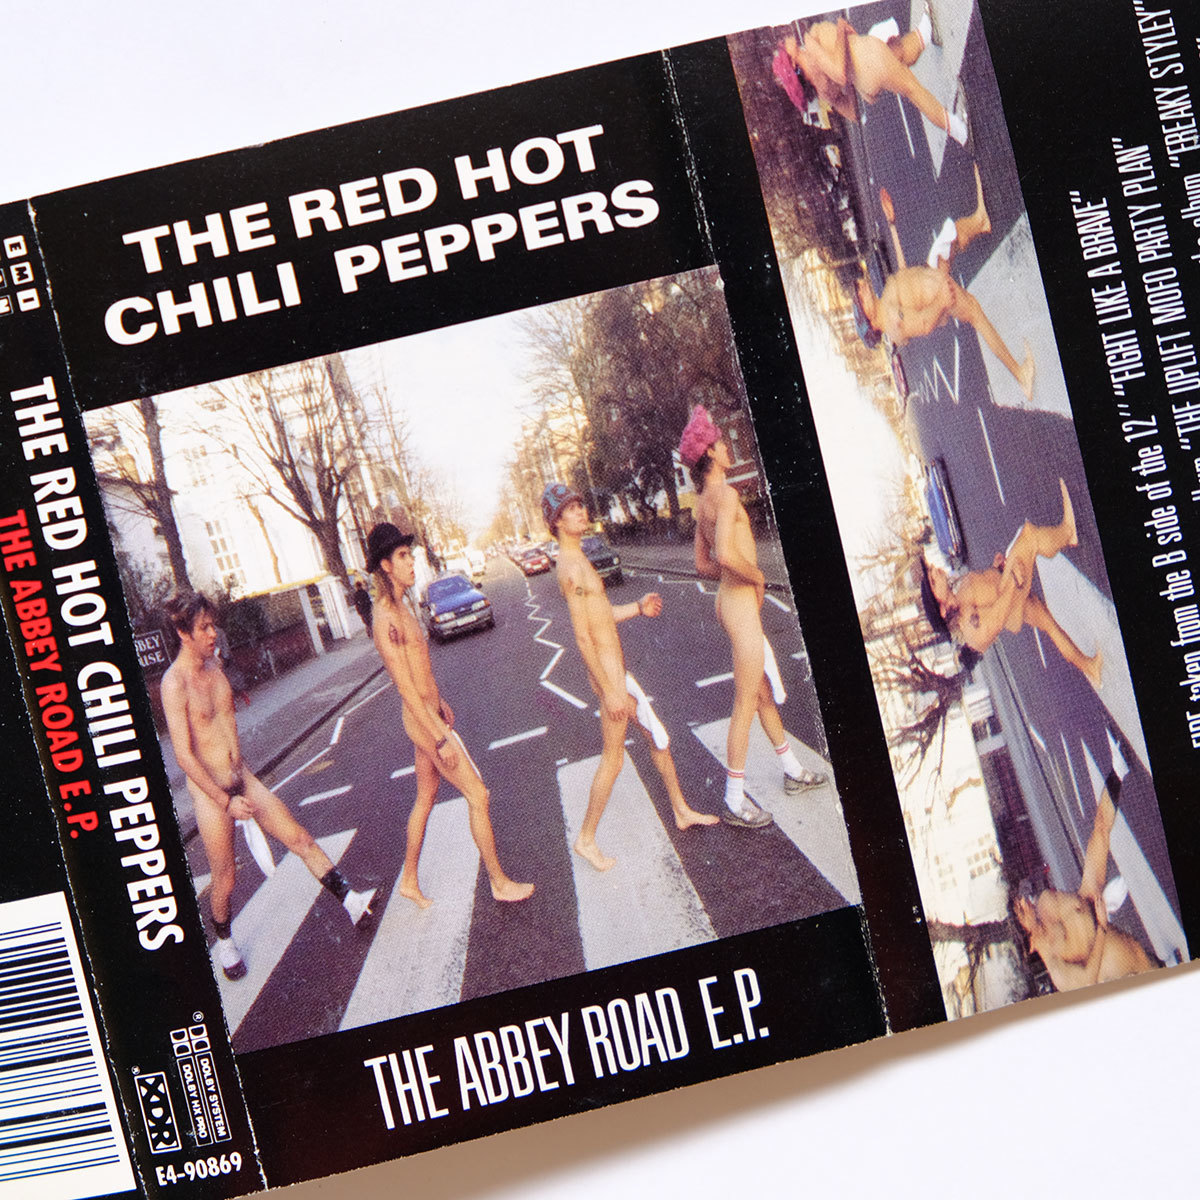 { height sound quality XDR specification / dolby HX PRO/US version cassette tape }Red Hot Chili Peppers*The Abbey Road E.P.* red hot Chile pepper z/RHCP